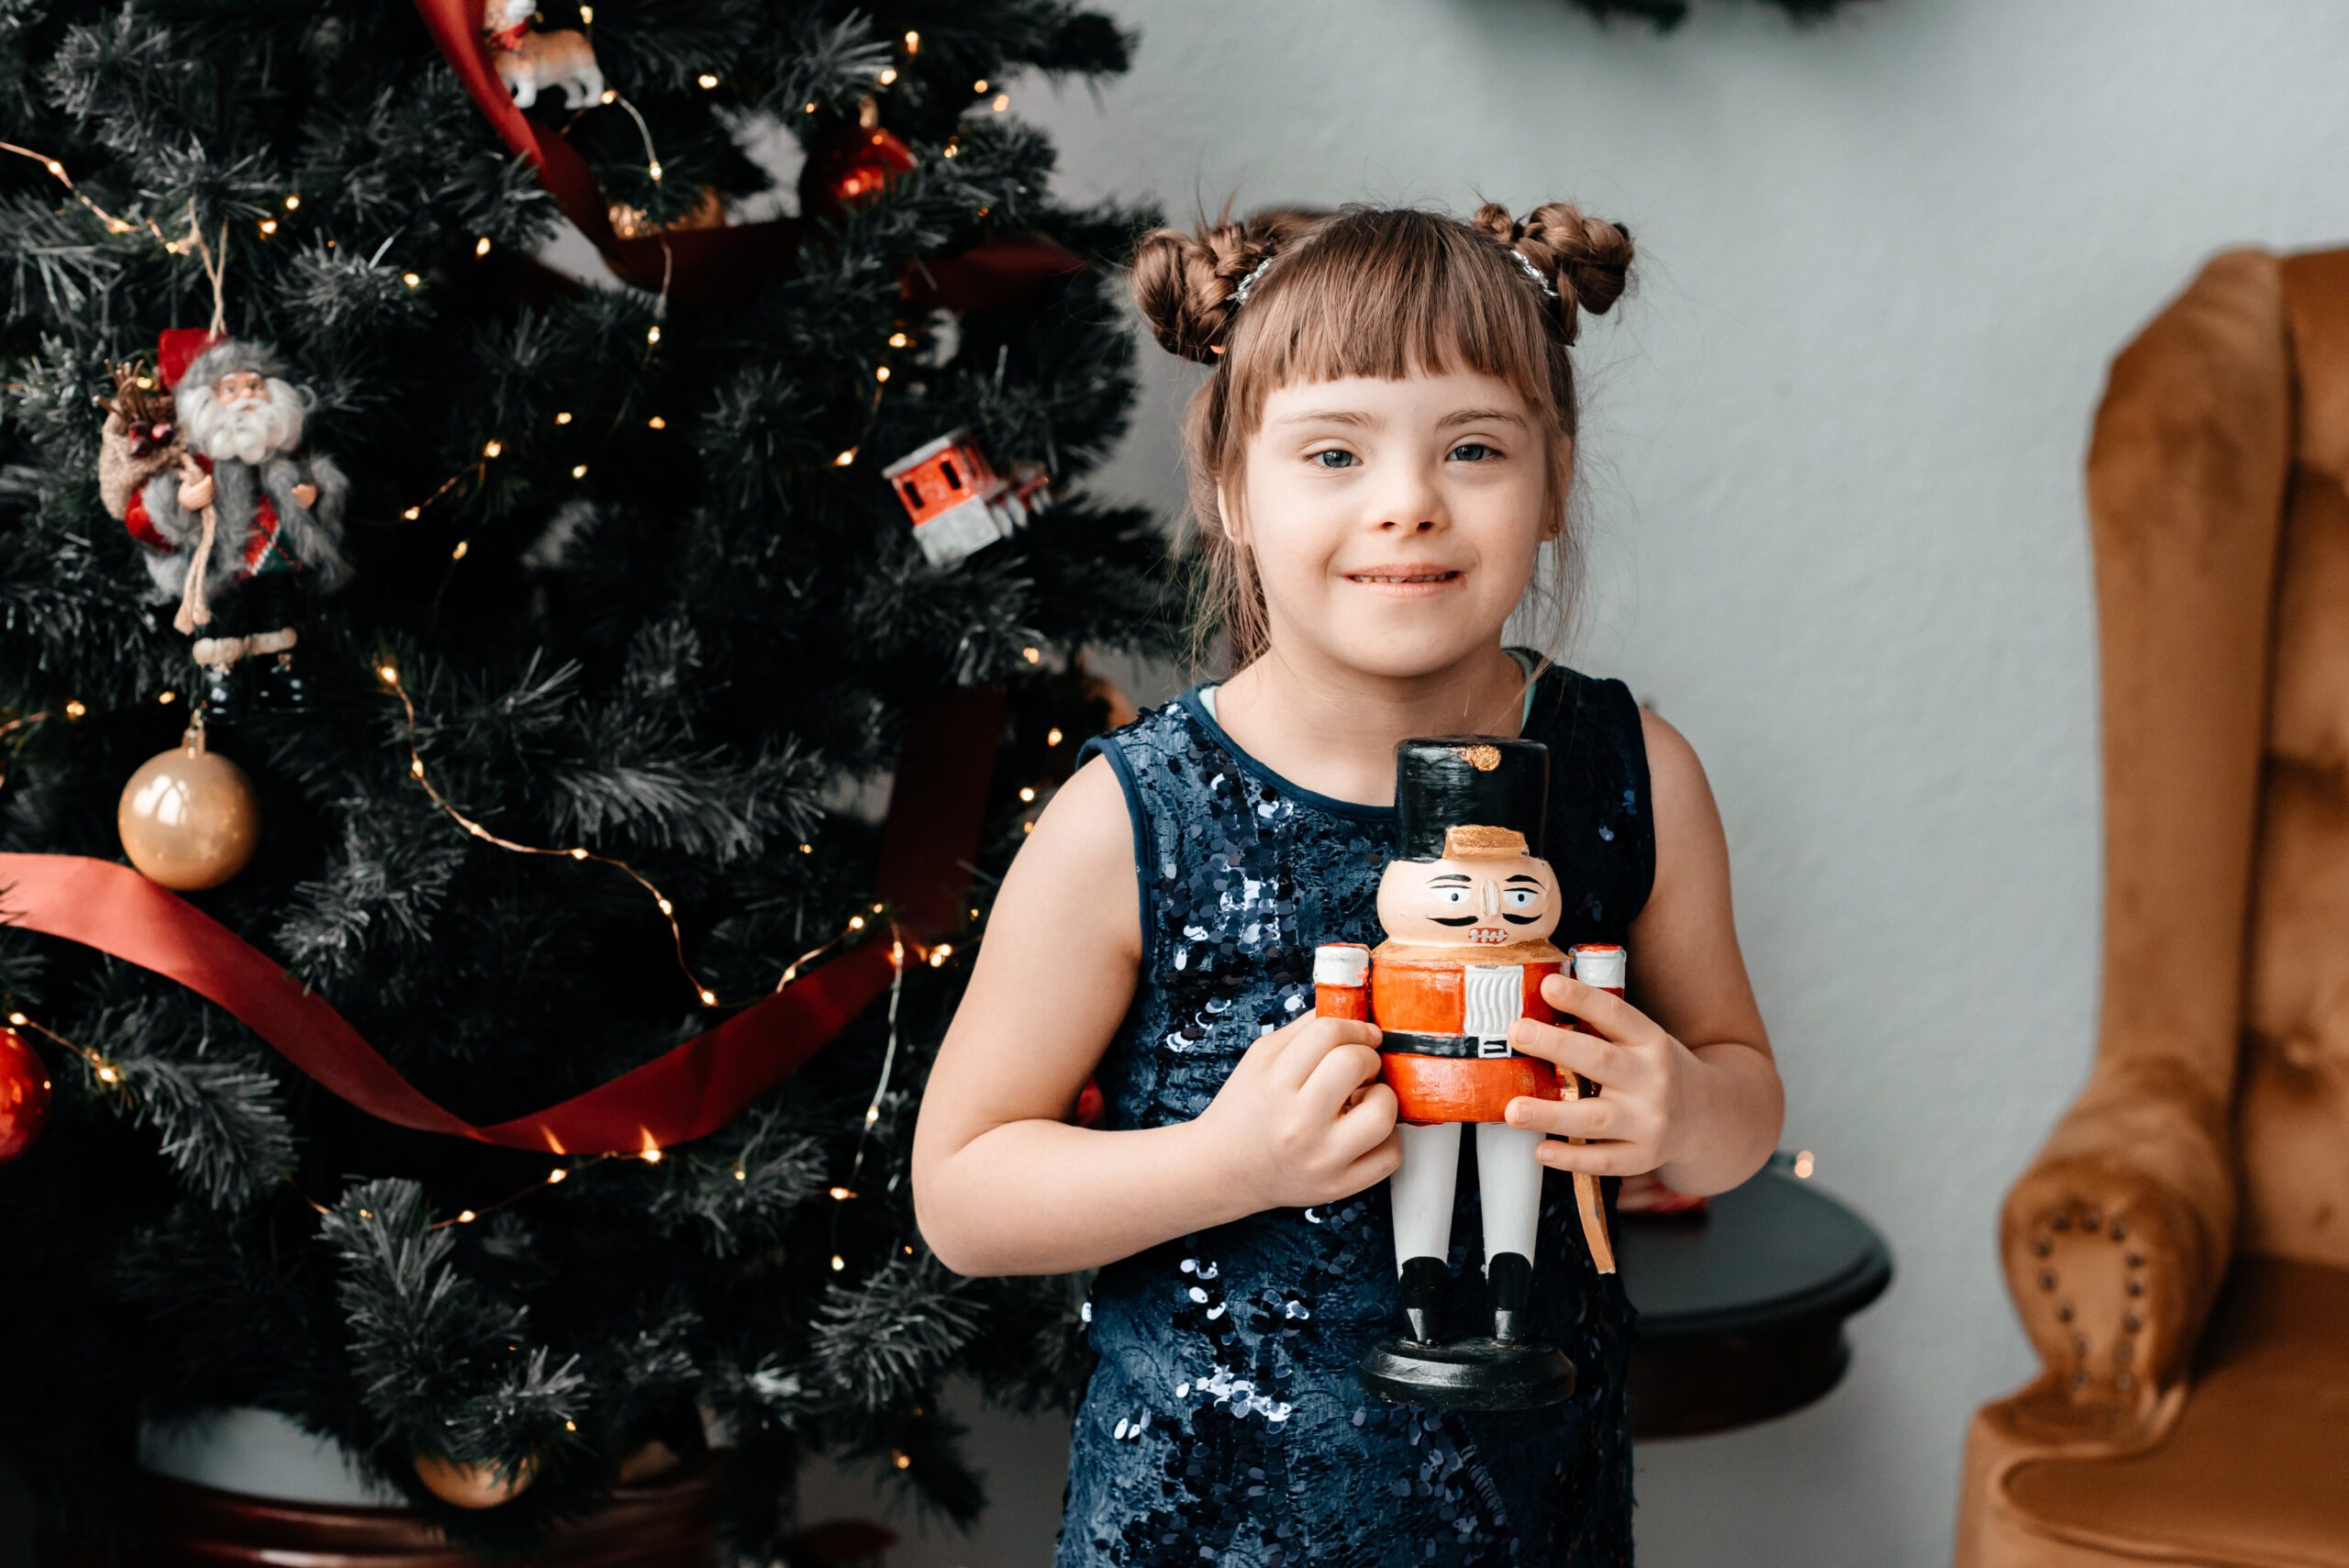 3 Tech Gift Ideas for People with Disabilities This Christmas